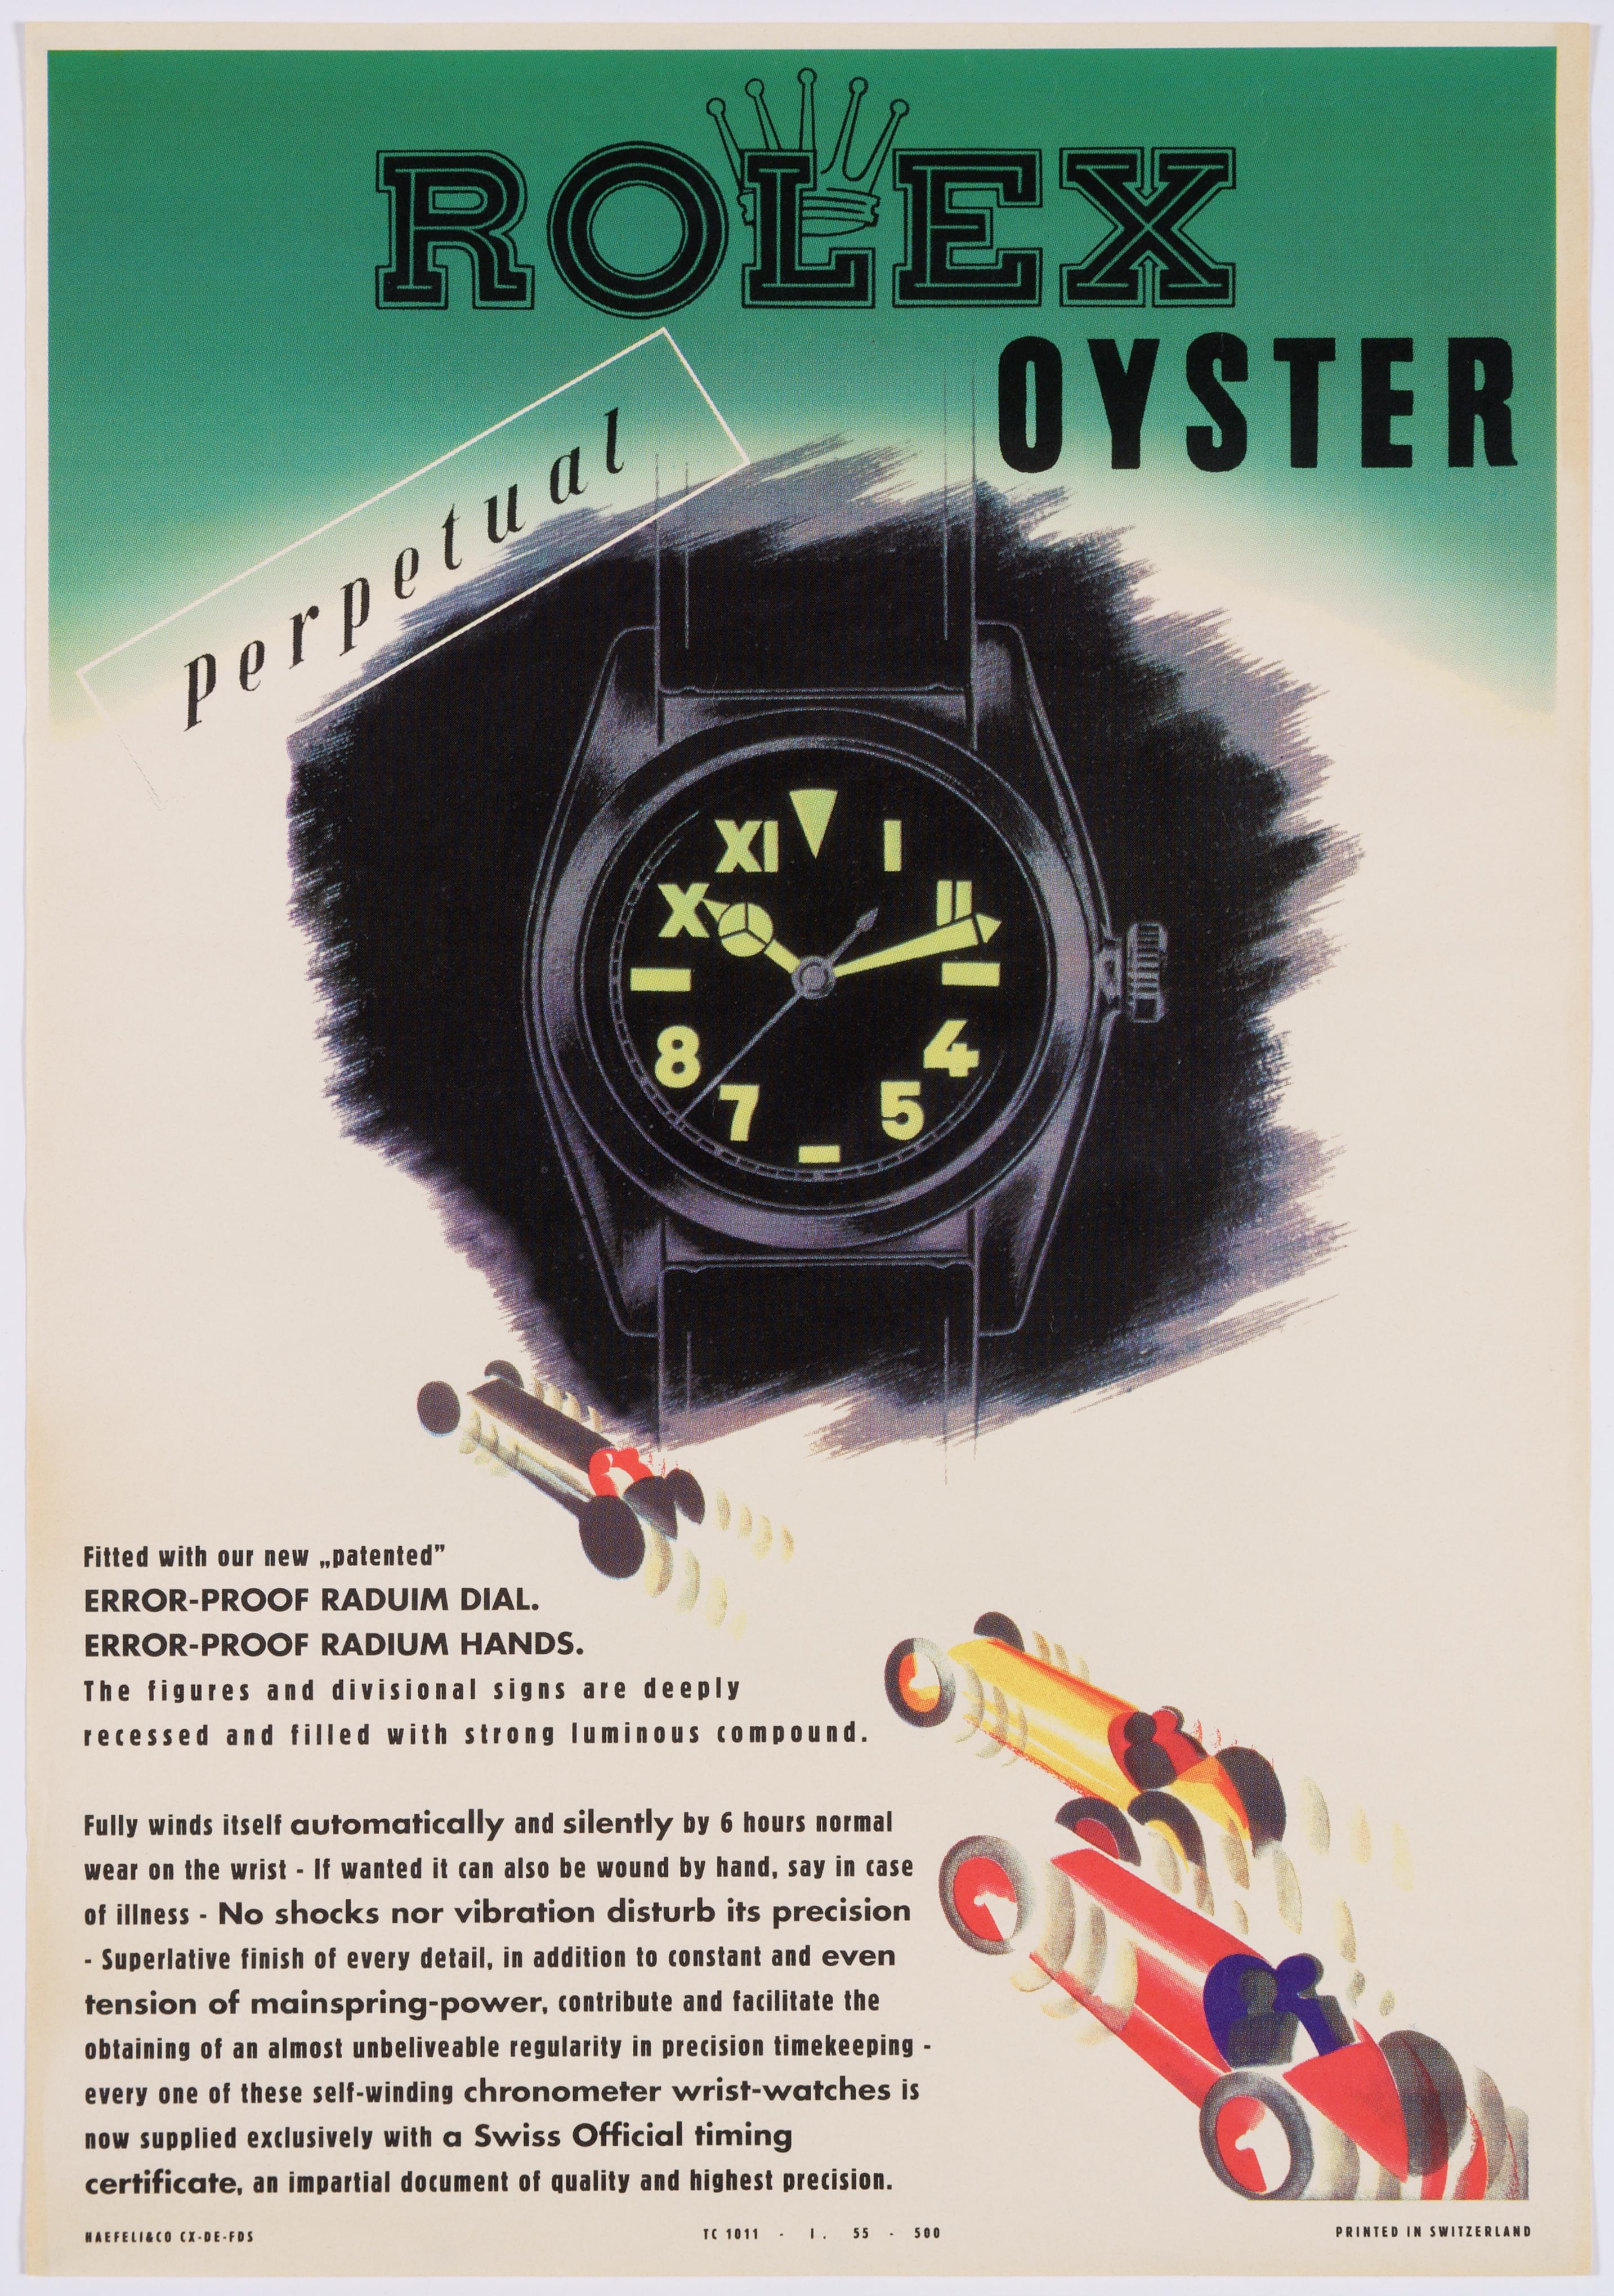 Rolex Oyster – Original Vintage Swiss Product Poster